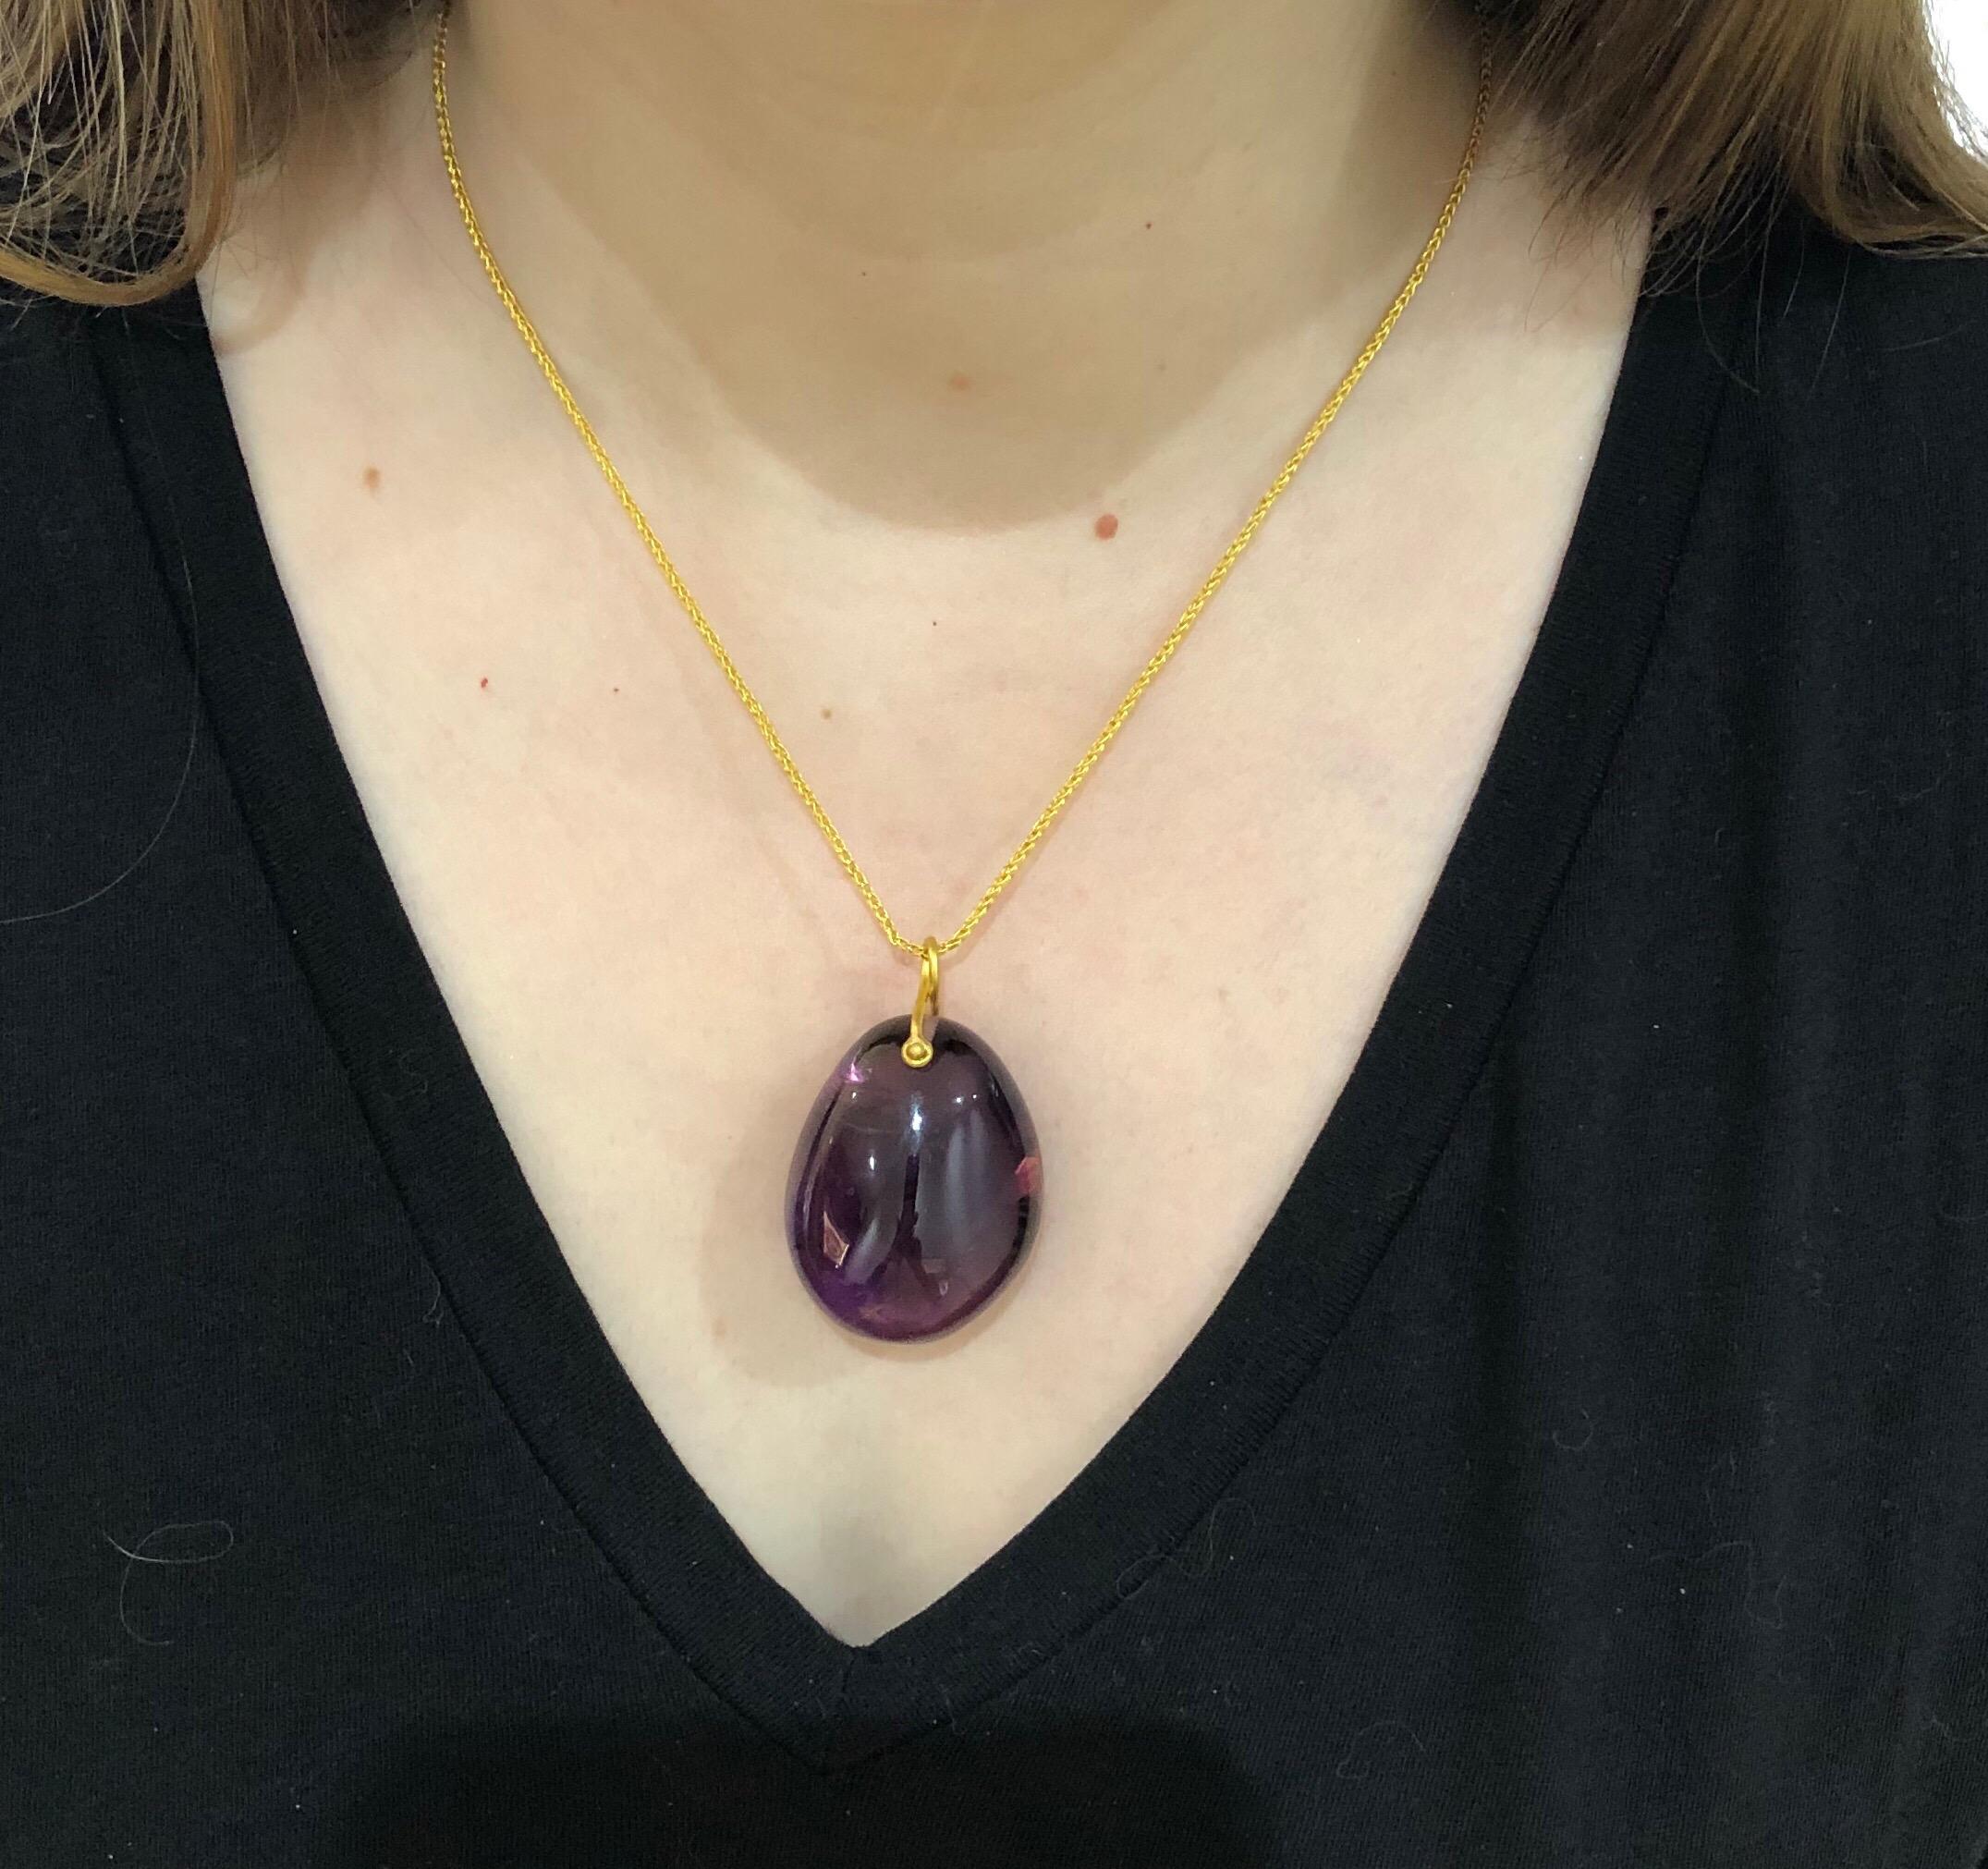 Contemporary Hand Carved Extra Large Amethyst of 160 carats 22 Karat Gold Pendant